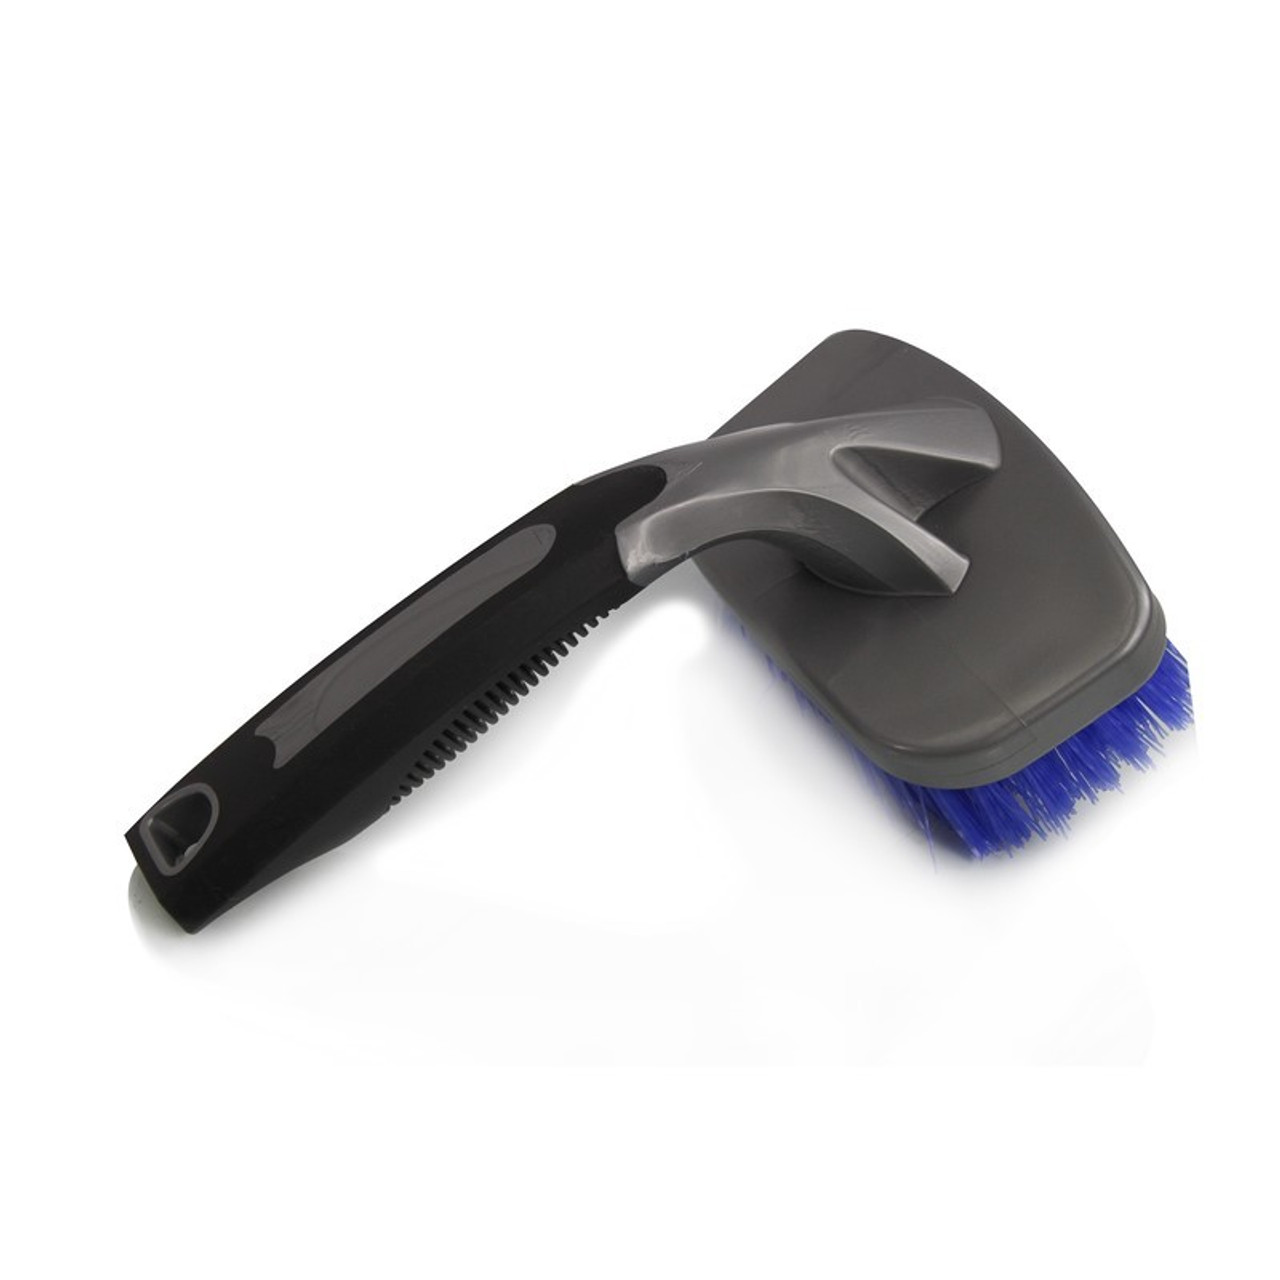 Chemical Guys ACC_204 - Curved Tire Brush